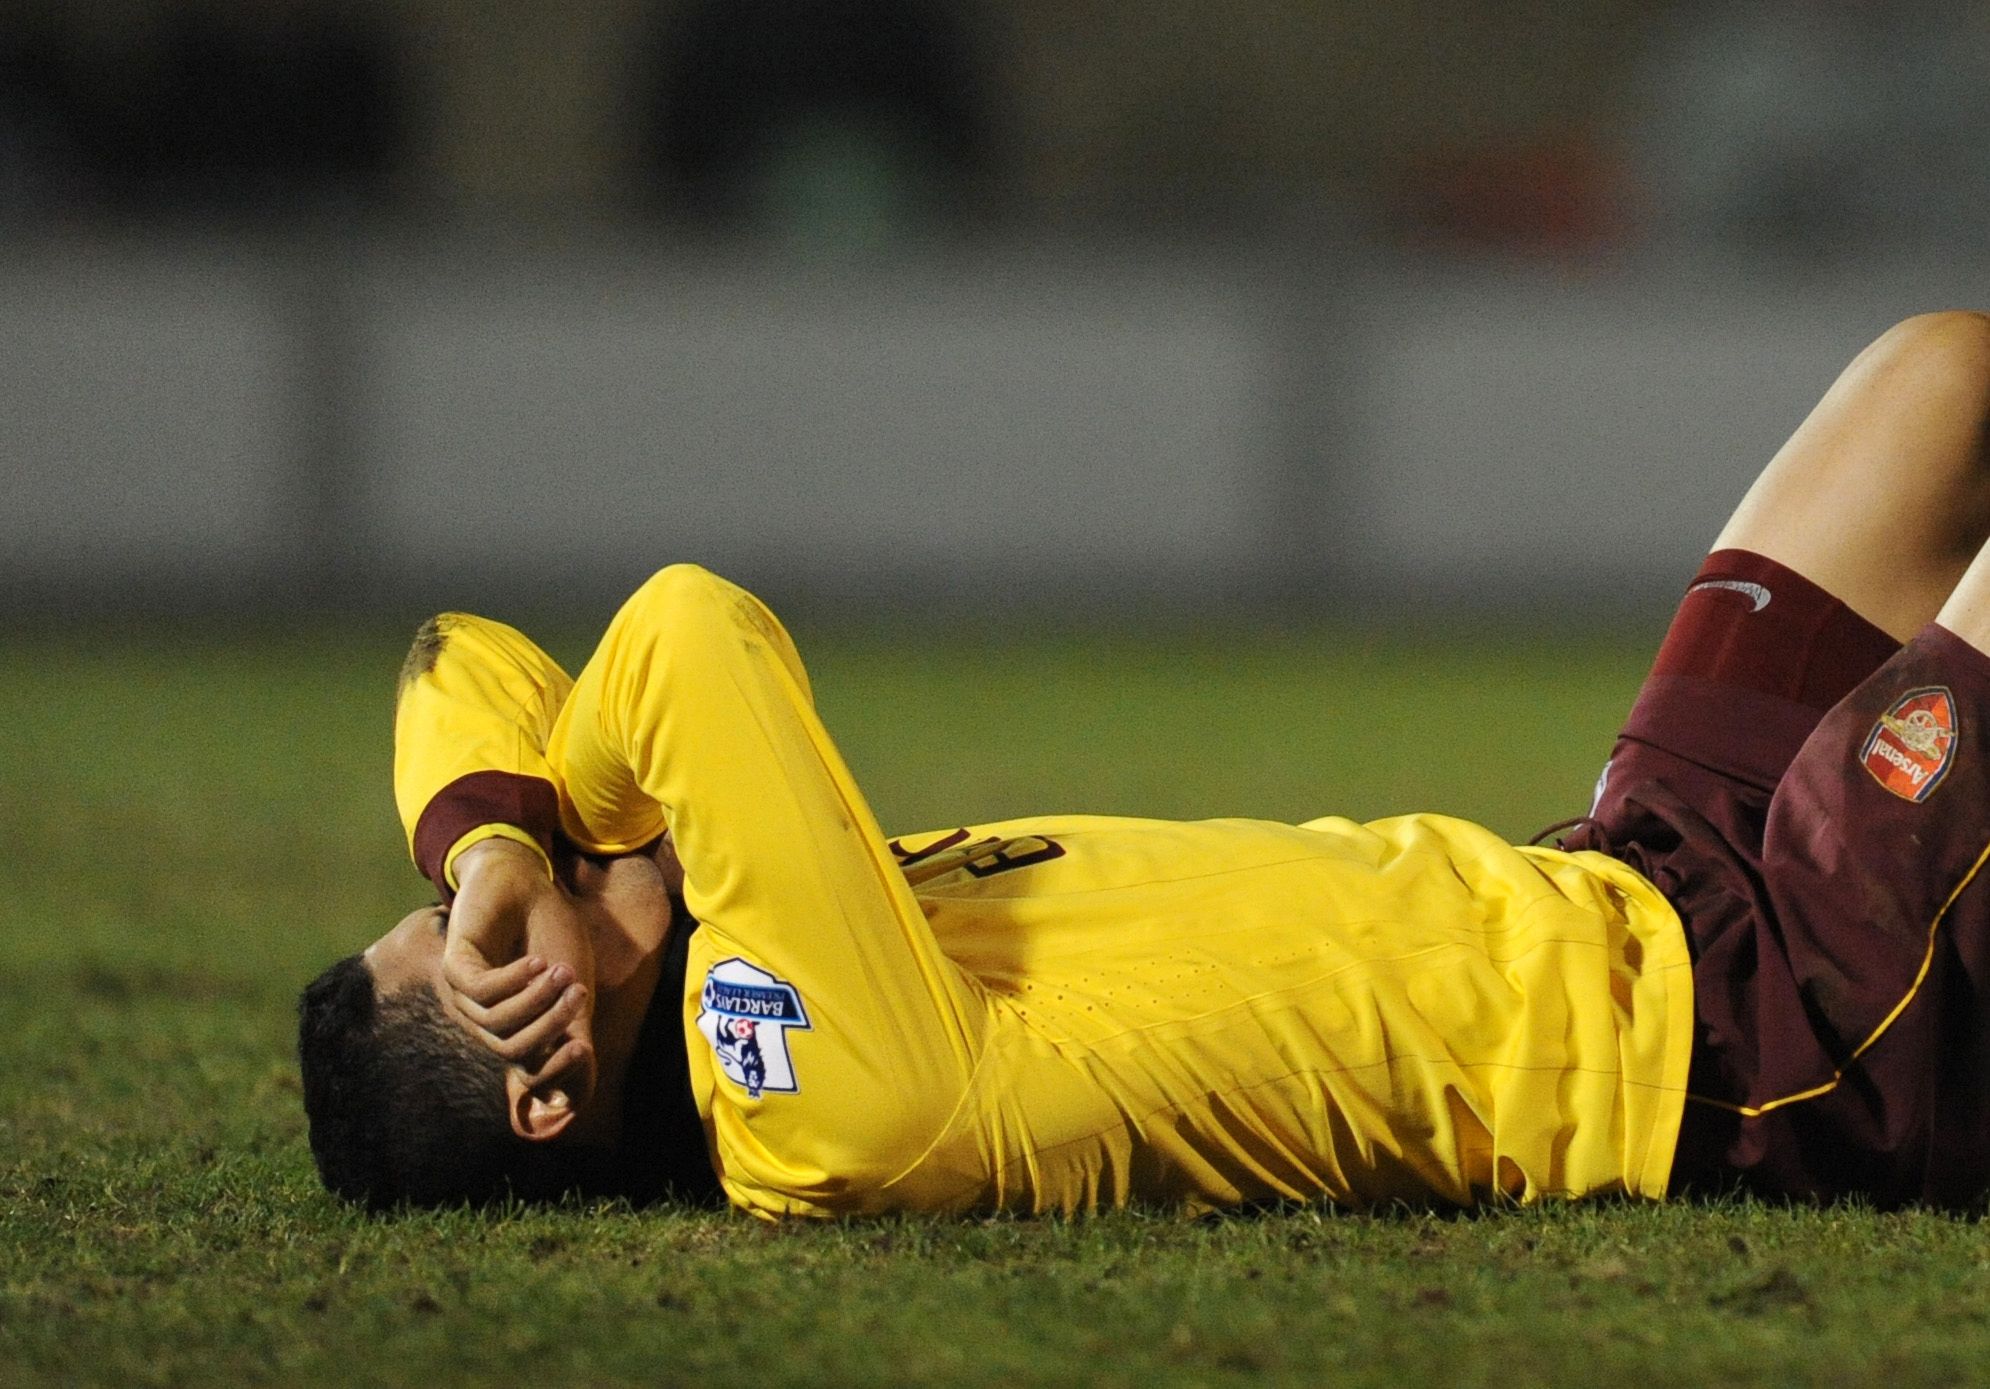 Football - Leyton Orient v Arsenal FA Cup Fifth Round  - The Matchroom Stadium, Brisbane Road - 10/11 - 20/2/11 
Arsenal's Denilson lies on the picth after appearing to sustain an injury 
Mandatory Credit: Action Images / Tony O'Brien 
Livepic